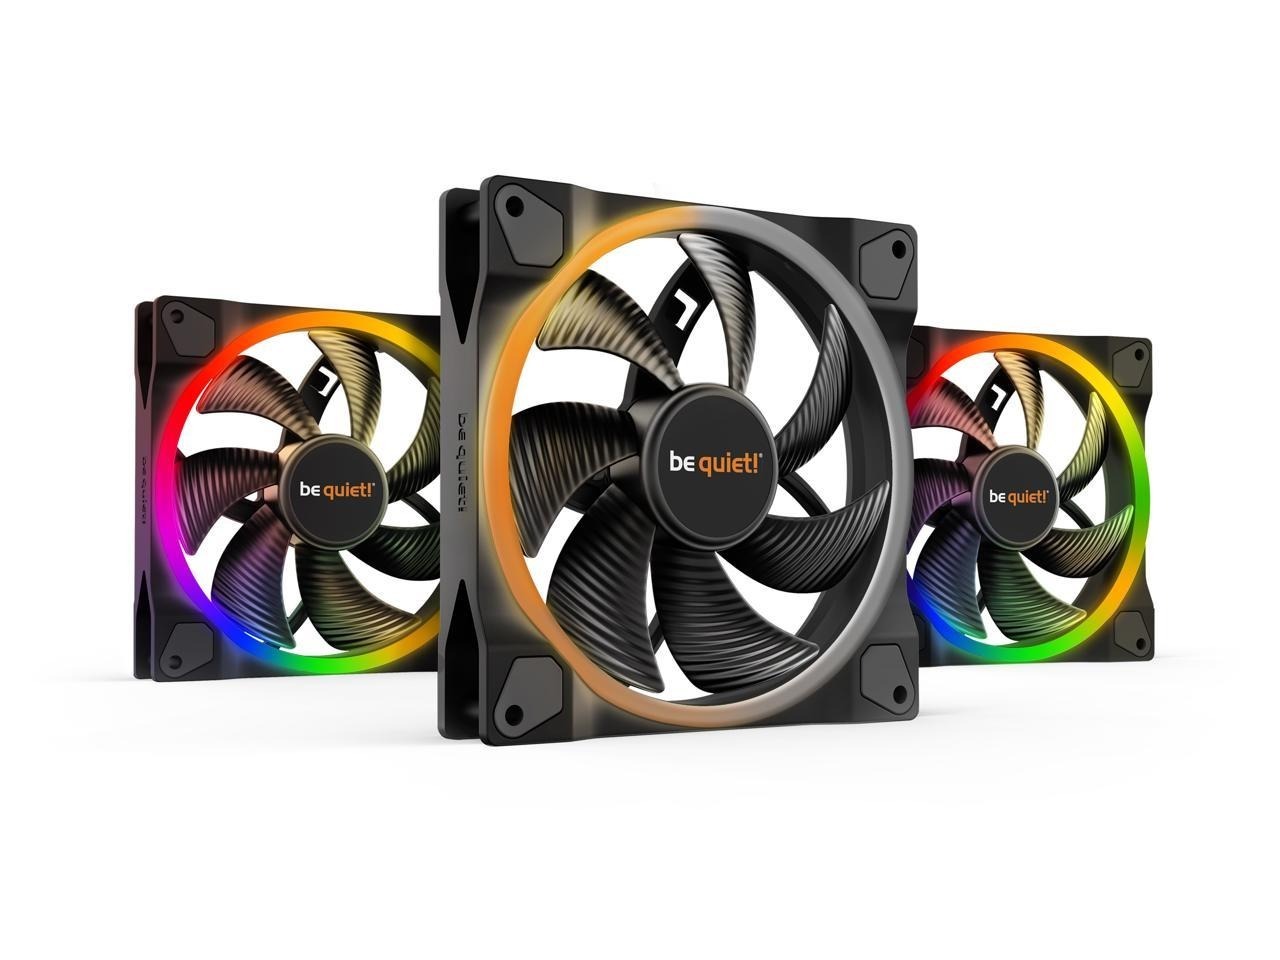 3-Pack 140mm be quiet! Light Wings PWM ARGB Computer Fans $54.90 + Free Shipping